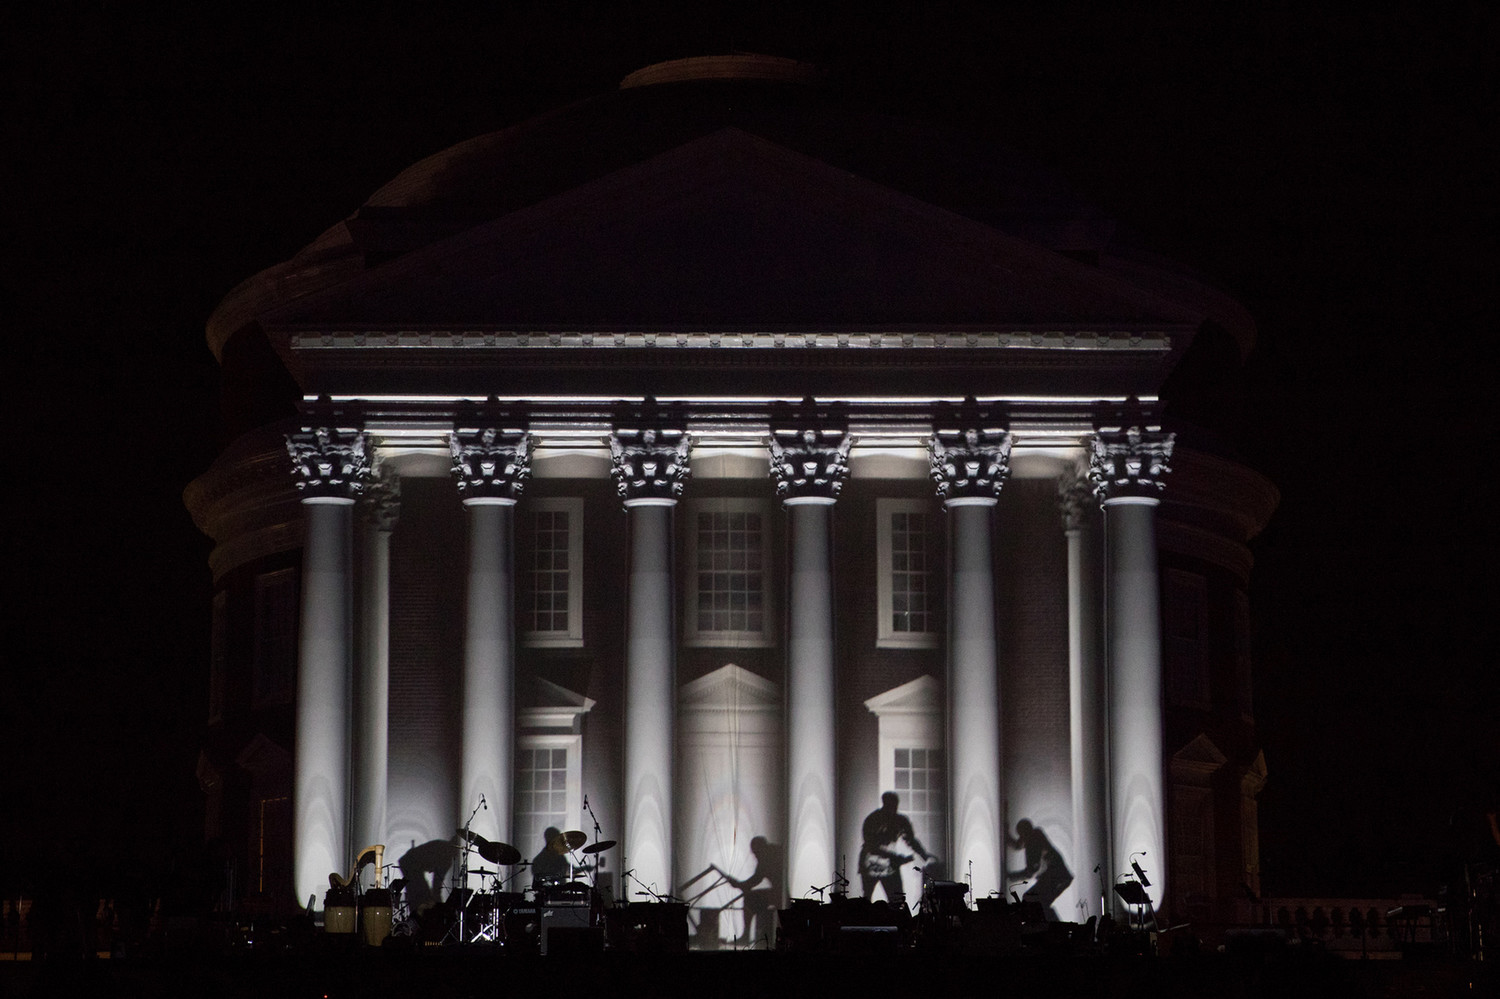 Projection Mapping of Enslaved Laborers building UVA's Rotunda